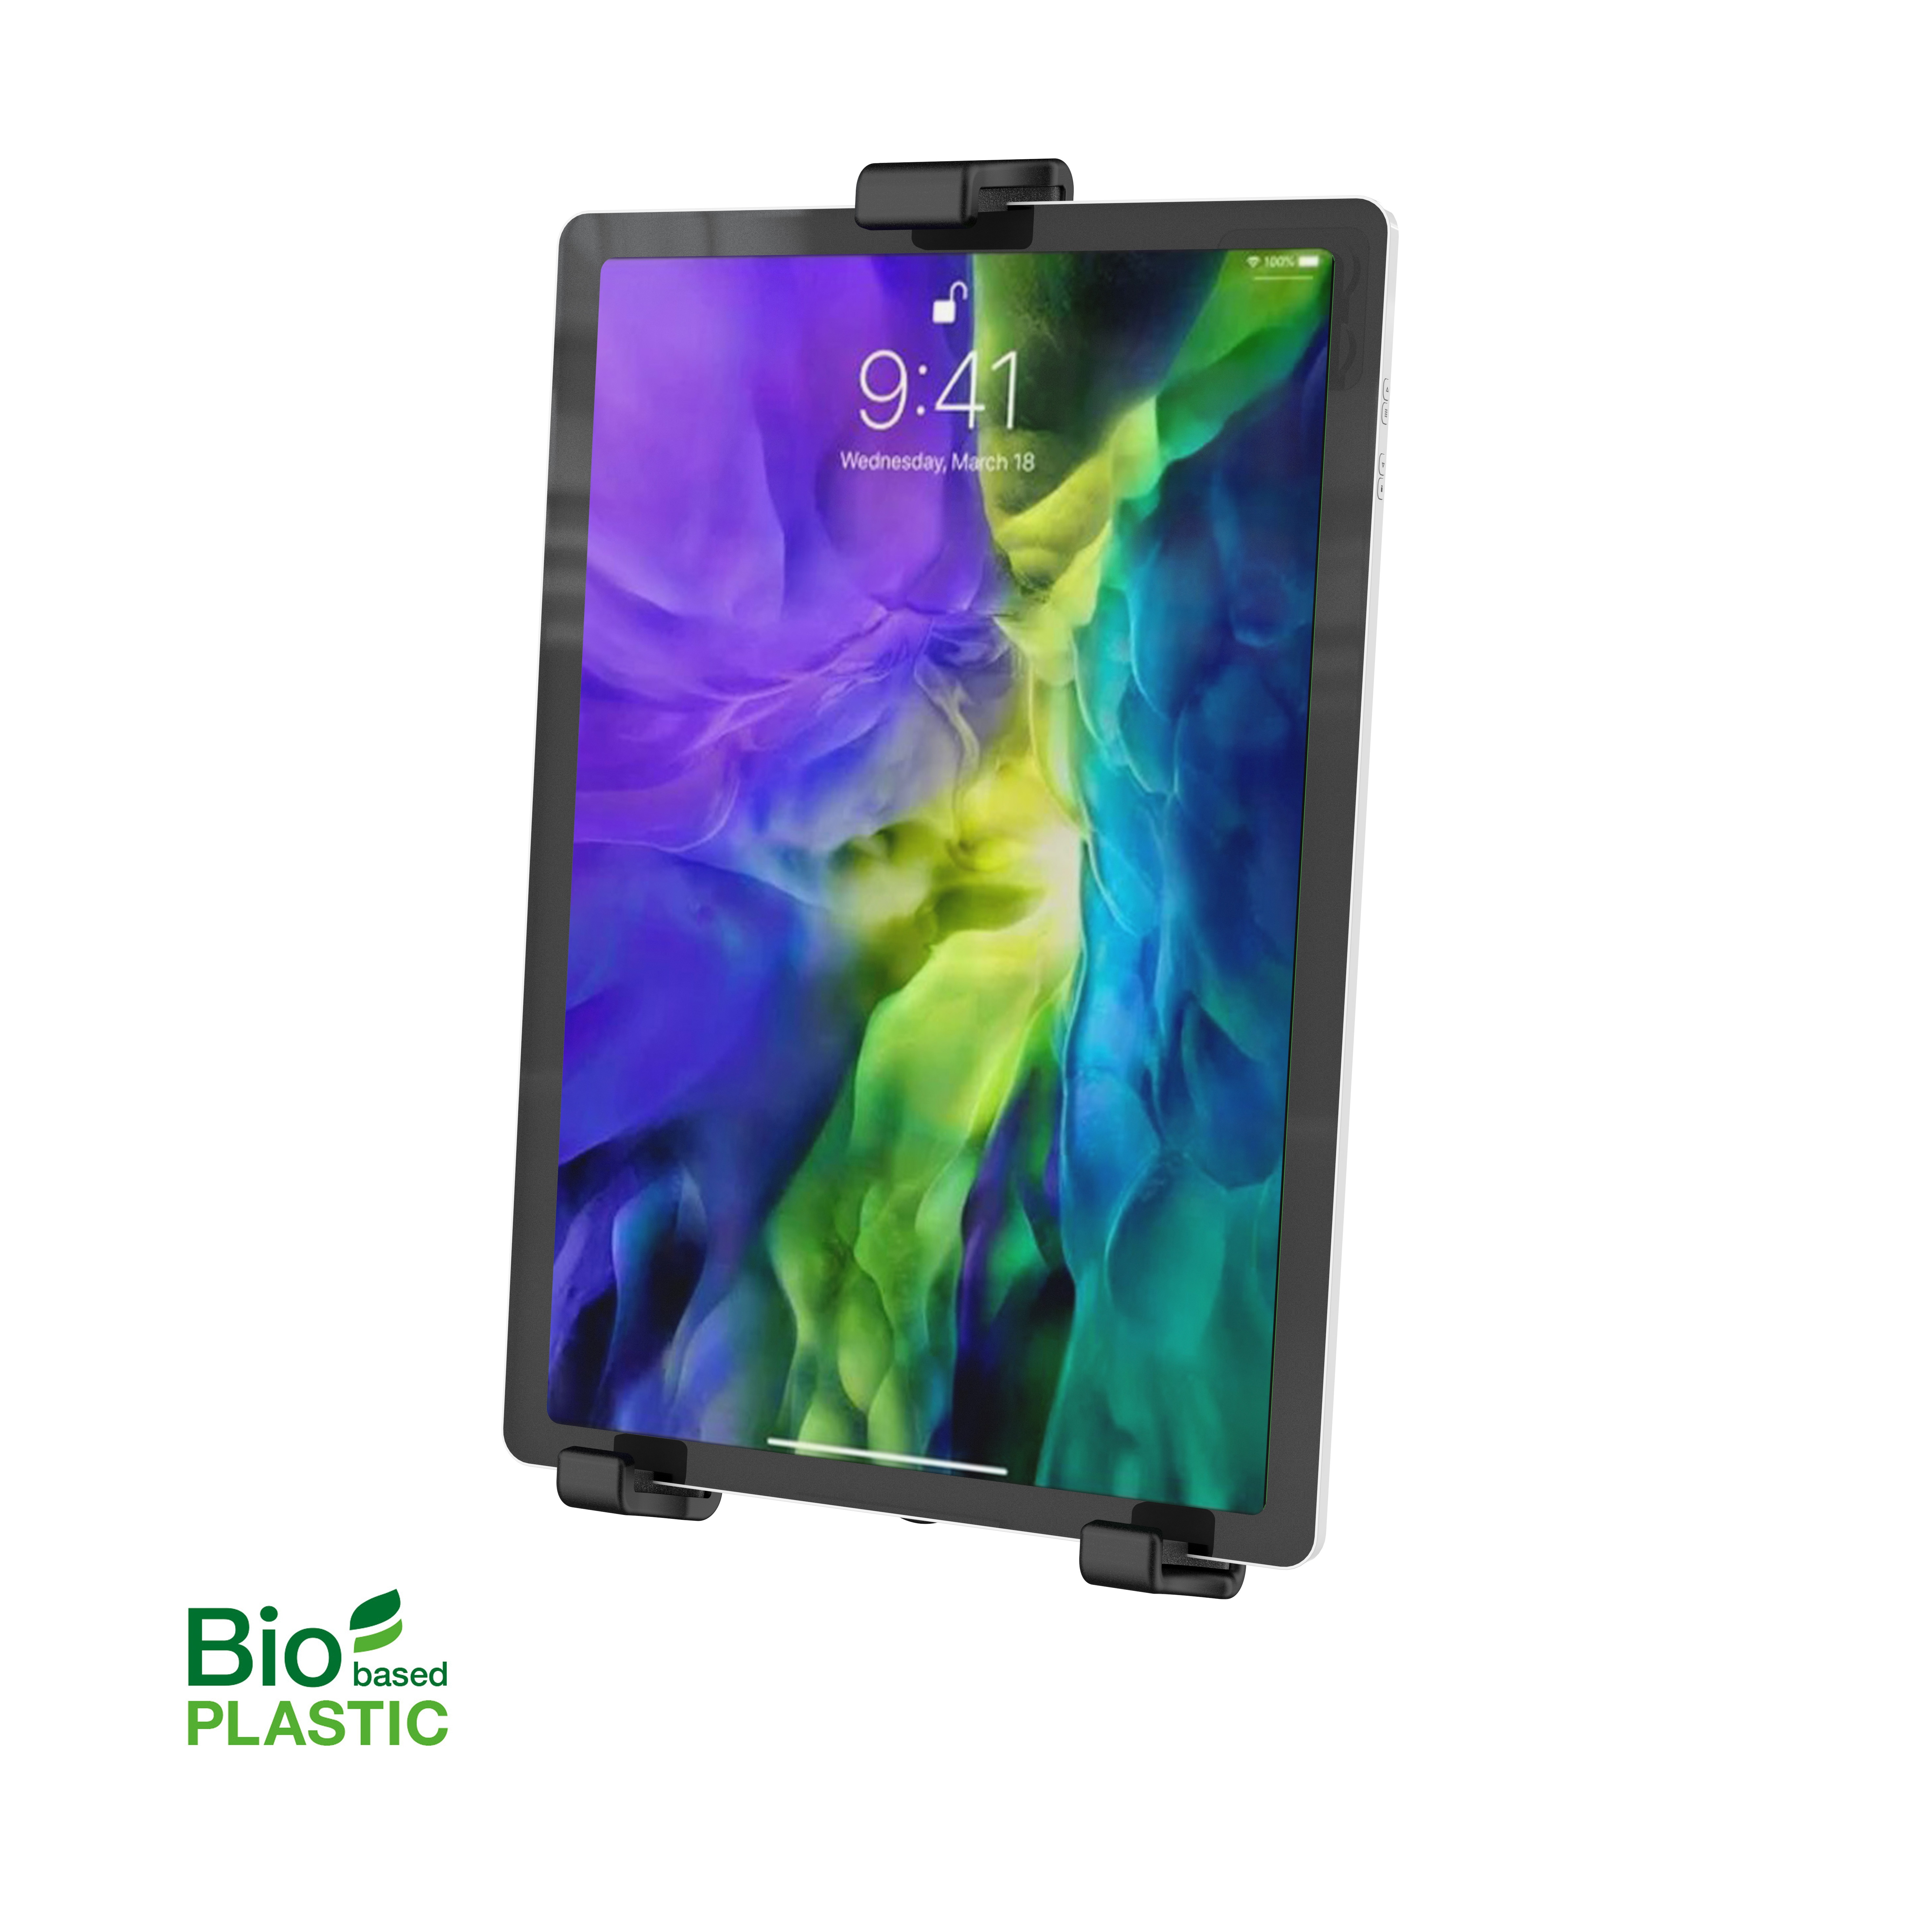 19766 Tablet PC stand holder "Biobased